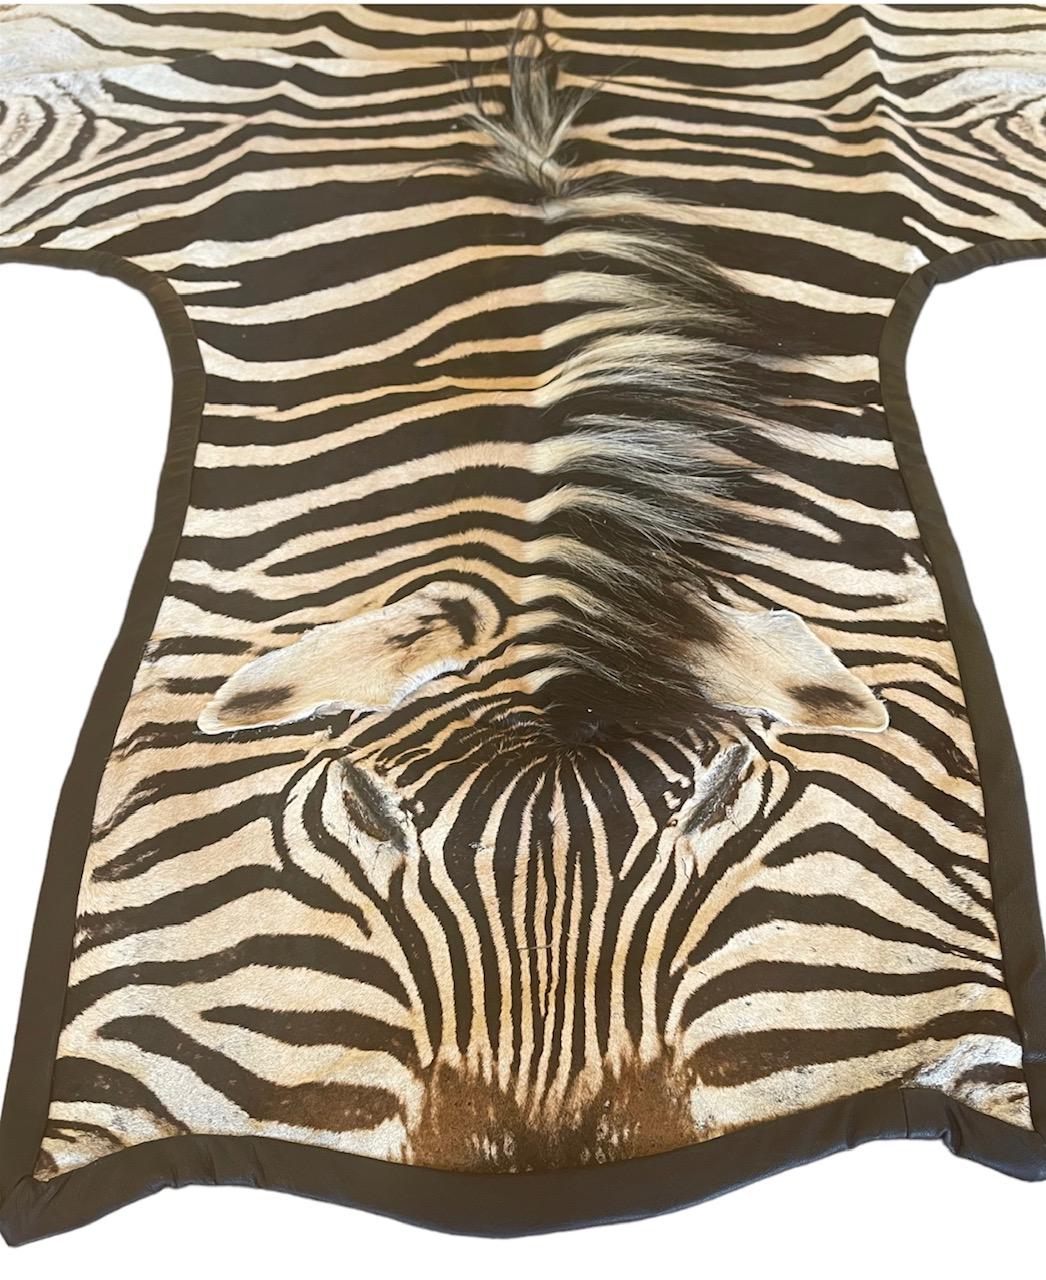 Come and browse our selection of South African Zebra Rugs. With our superb craftsmanship and quality stock, we can assure you that this stable luxury item will last for years to come. Each rug is fitted with a weighted hand-stitched lining. This